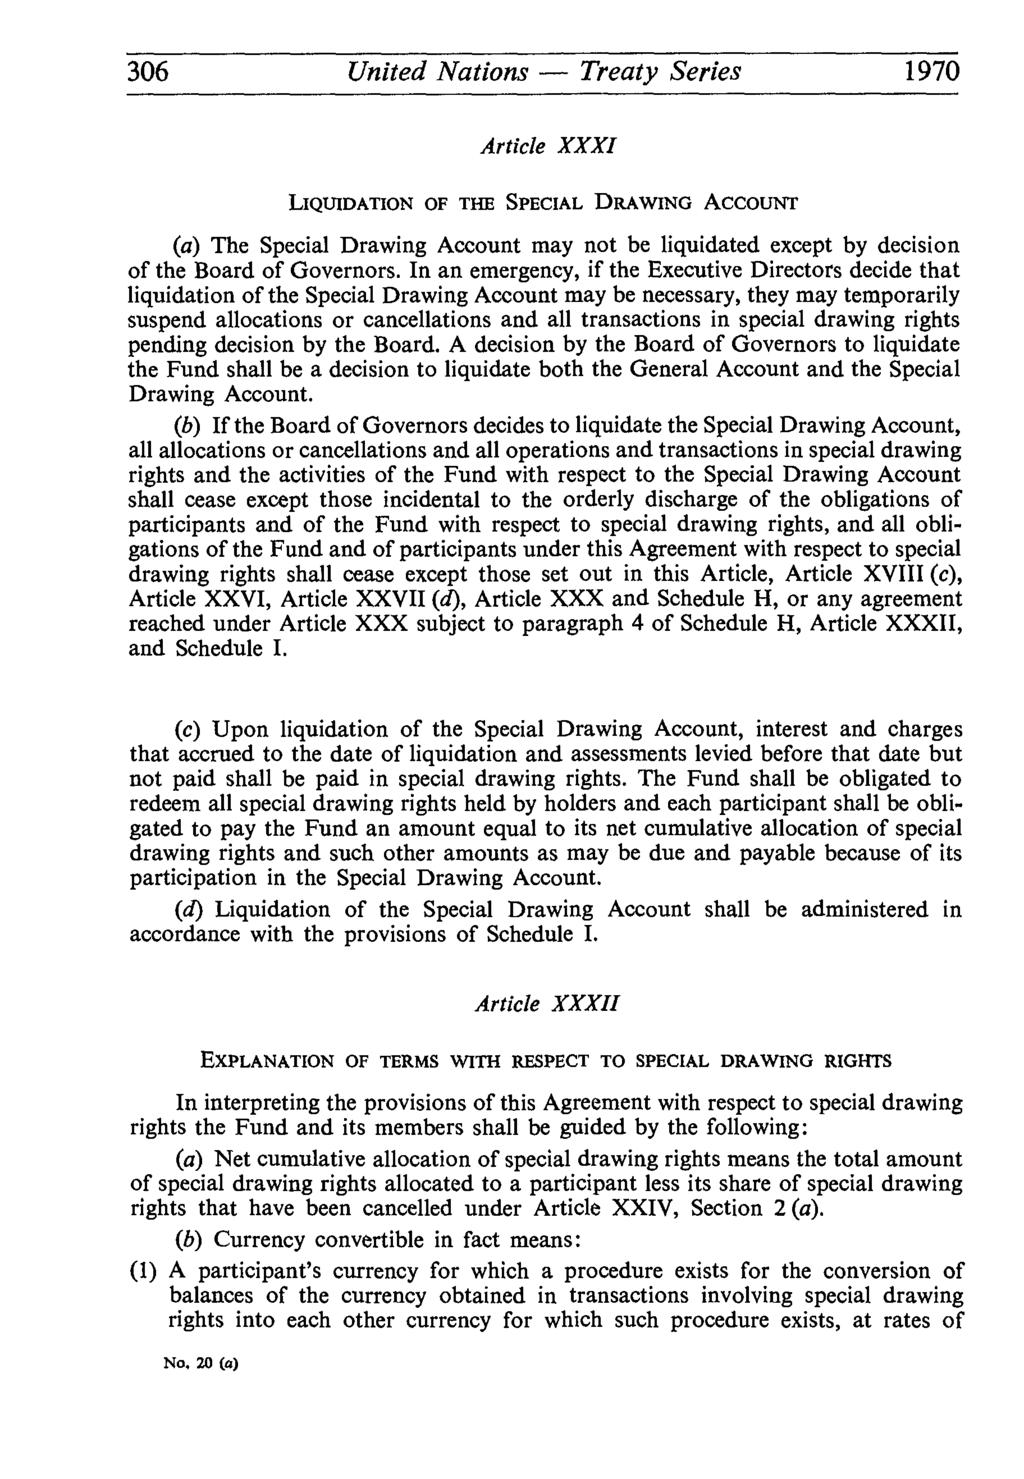 306 United Nations Treaty Series 1970 Article XXXI LIQUIDATION OF THE SPECIAL DRAWING ACCOUNT (a) The Special Drawing Account may not be liquidated except by decision of the Board of Governors.